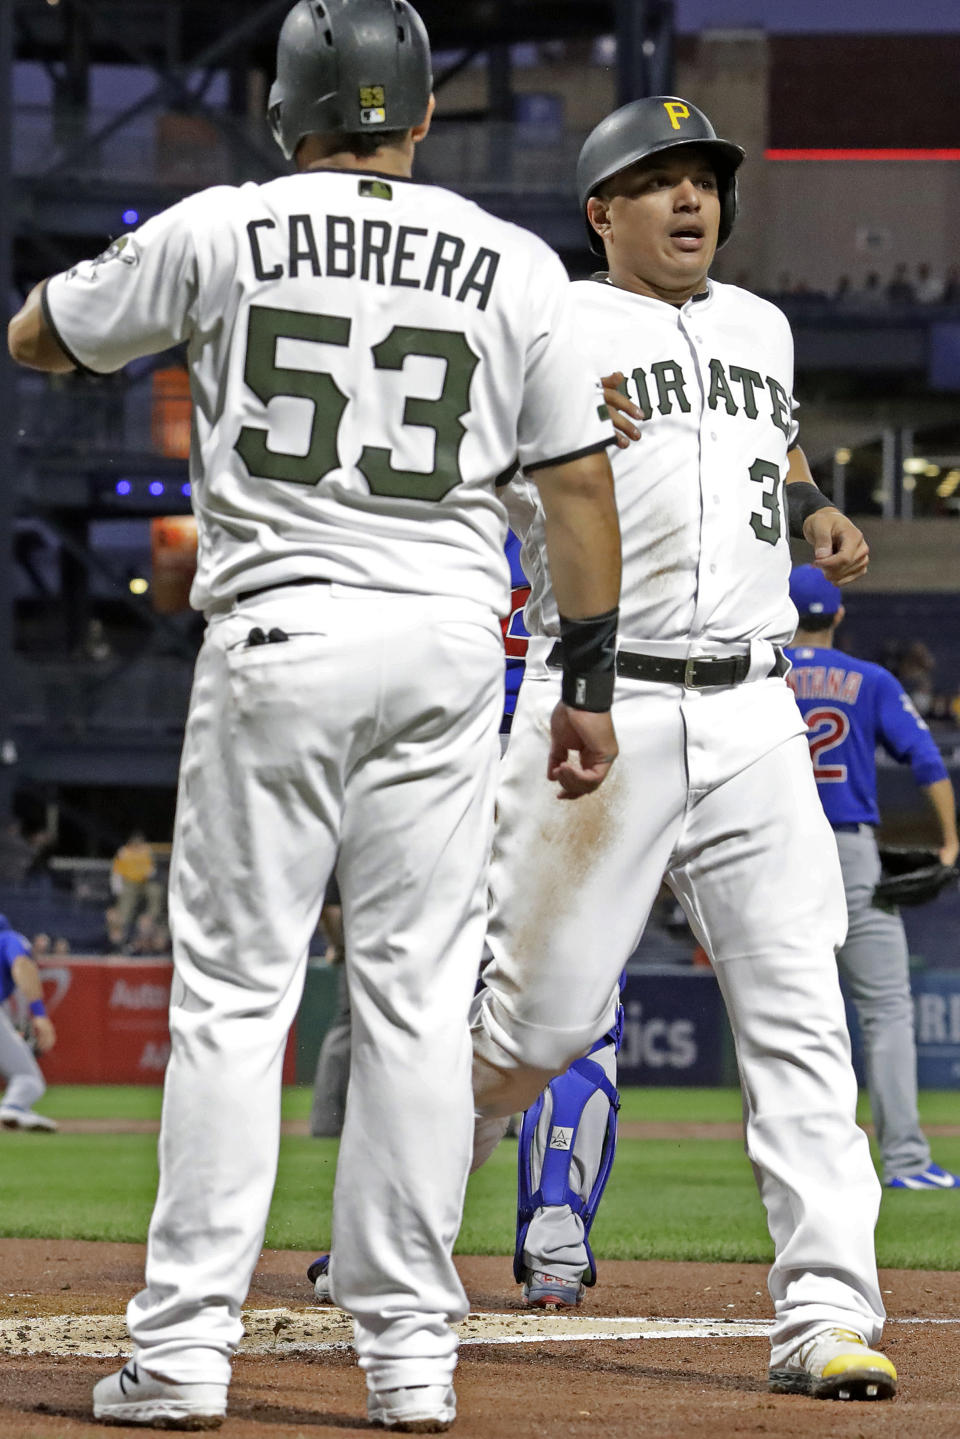 Pittsburgh Pirates' Jose Osuna, right, is greeted by Melky Cabrera (53) after they both scored on a triple by Pablo Reyes off Chicago Cubs starting pitcher Jose Quintana during the first inning of a baseball game in Pittsburgh, Thursday, Sept. 26, 2019. (AP Photo/Gene J. Puskar)